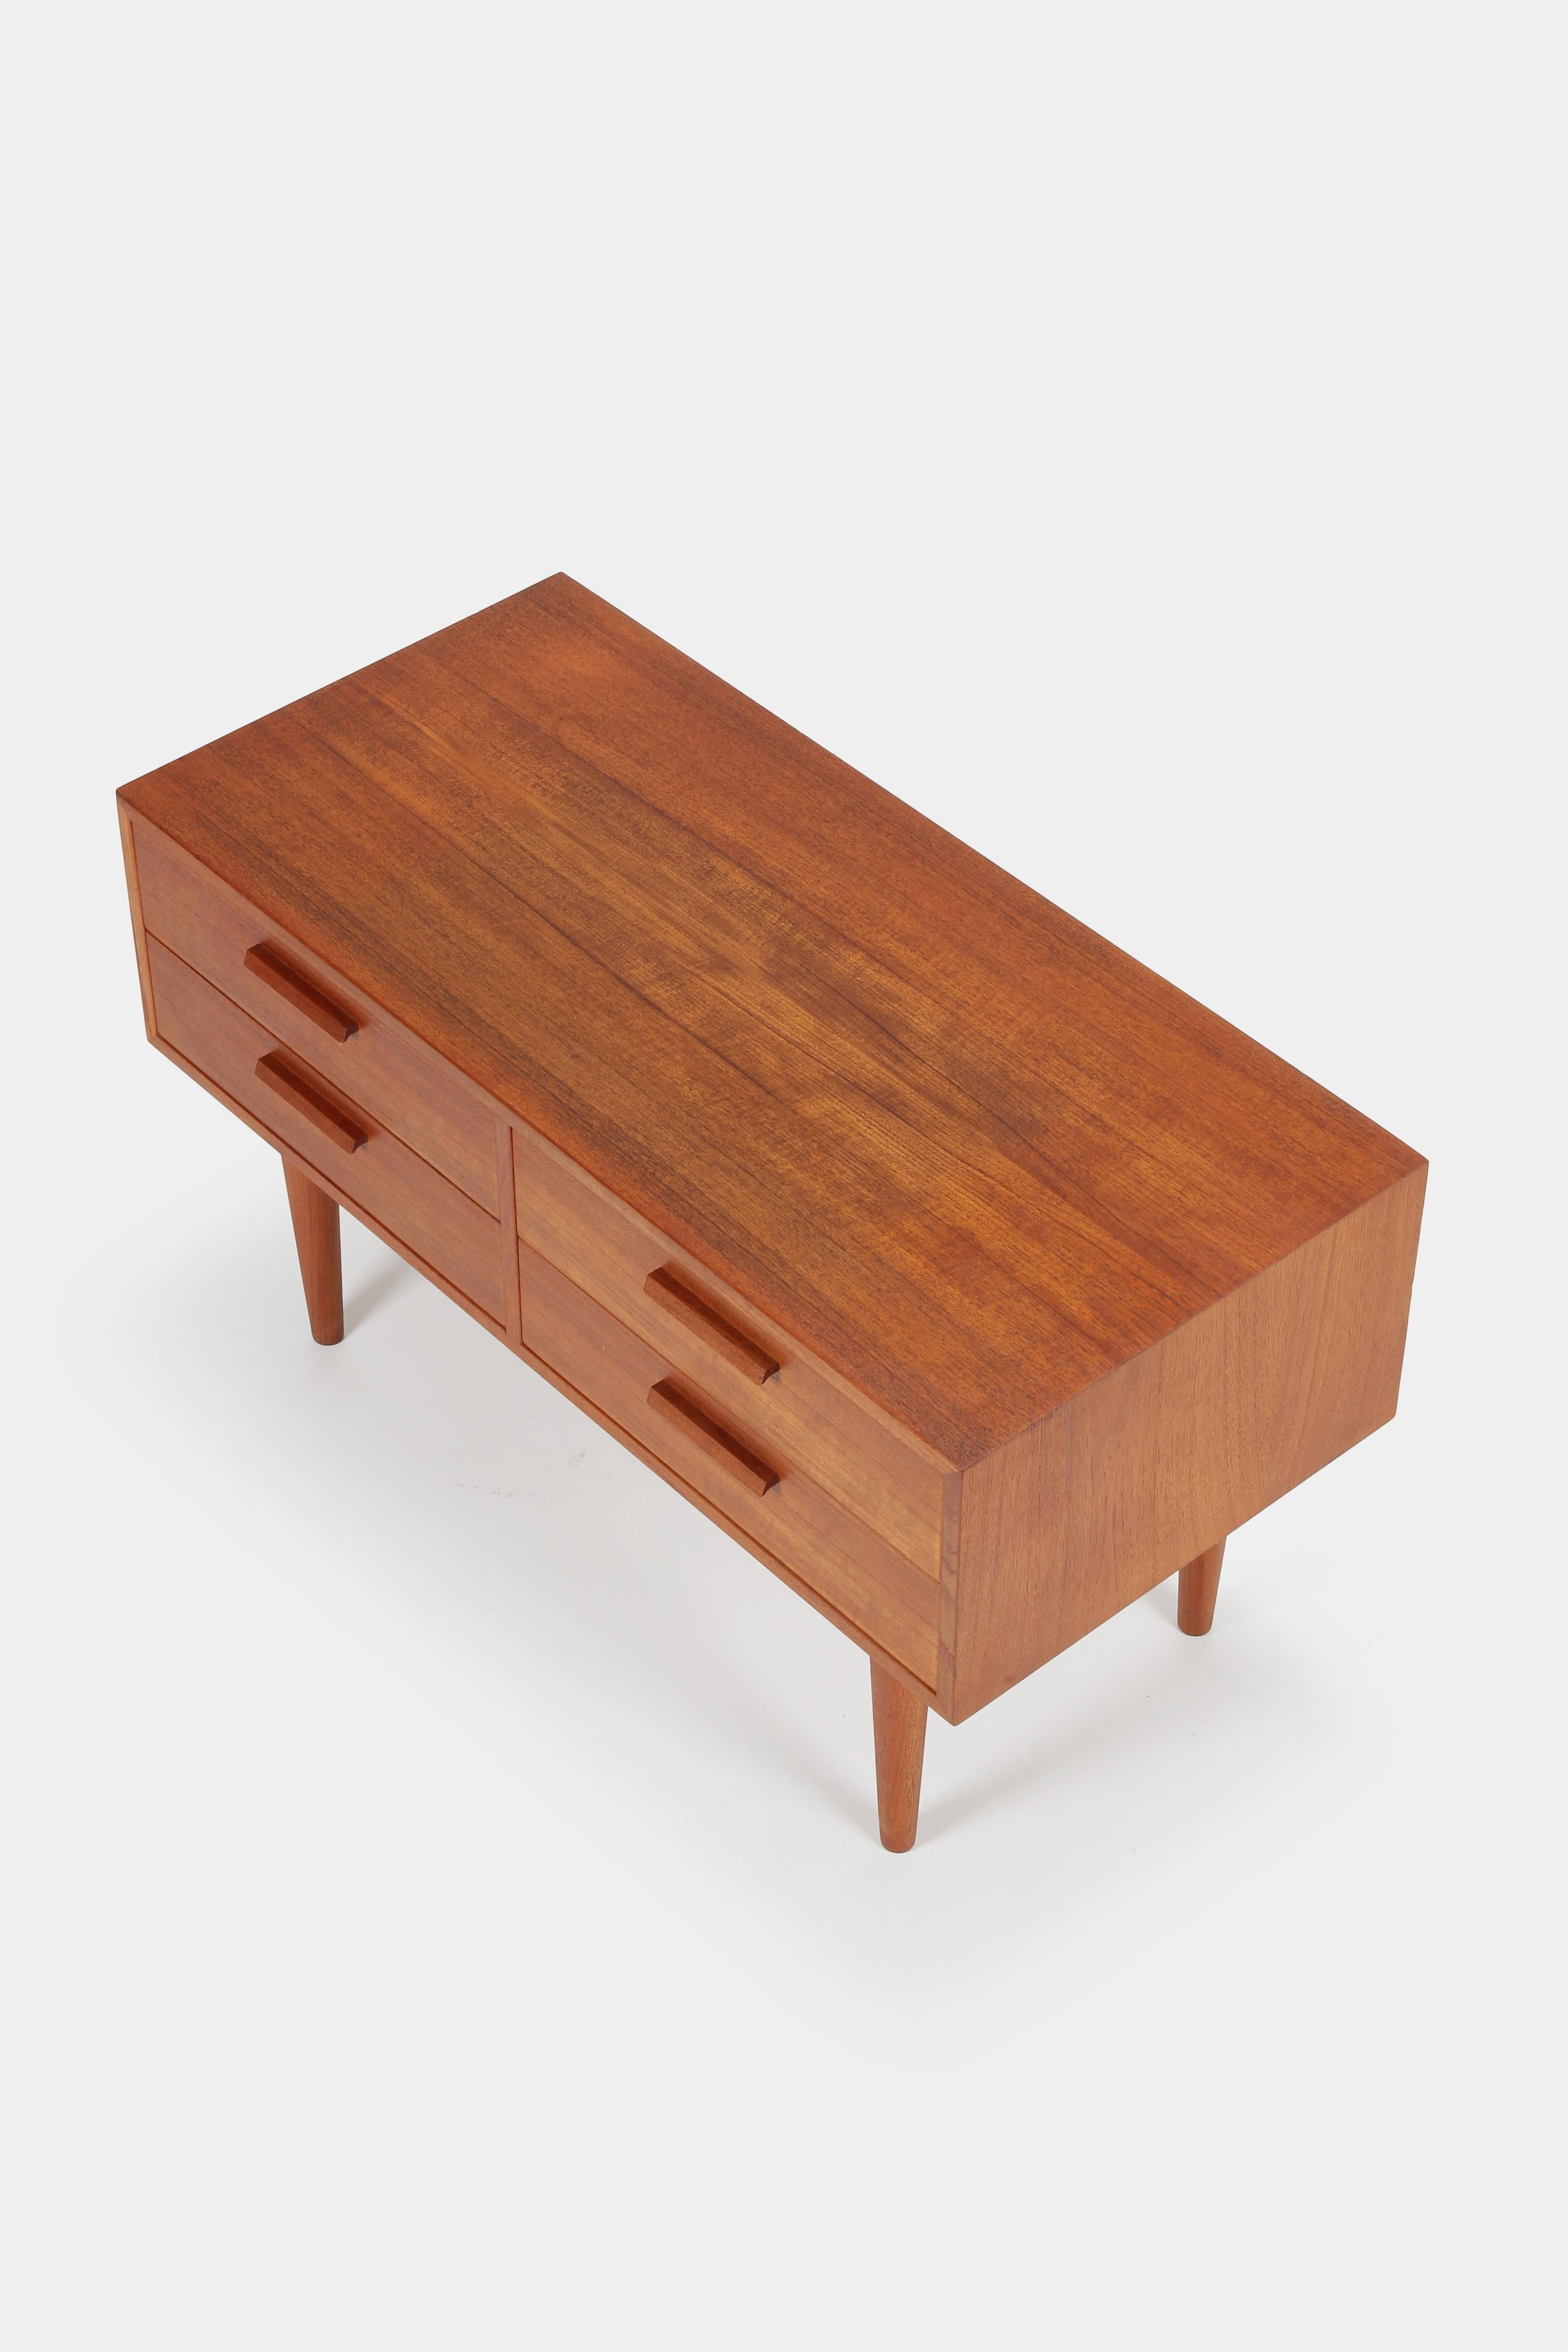 Kai Kristiansen Small Teak Dresser Midcentury modern Danish Design, 1960s

Elegant small dresser made of solid teak wood and veneer, ideal for the entrance hall or in a niche. With four nice drawers, the inside of the drawers are made of solid maple